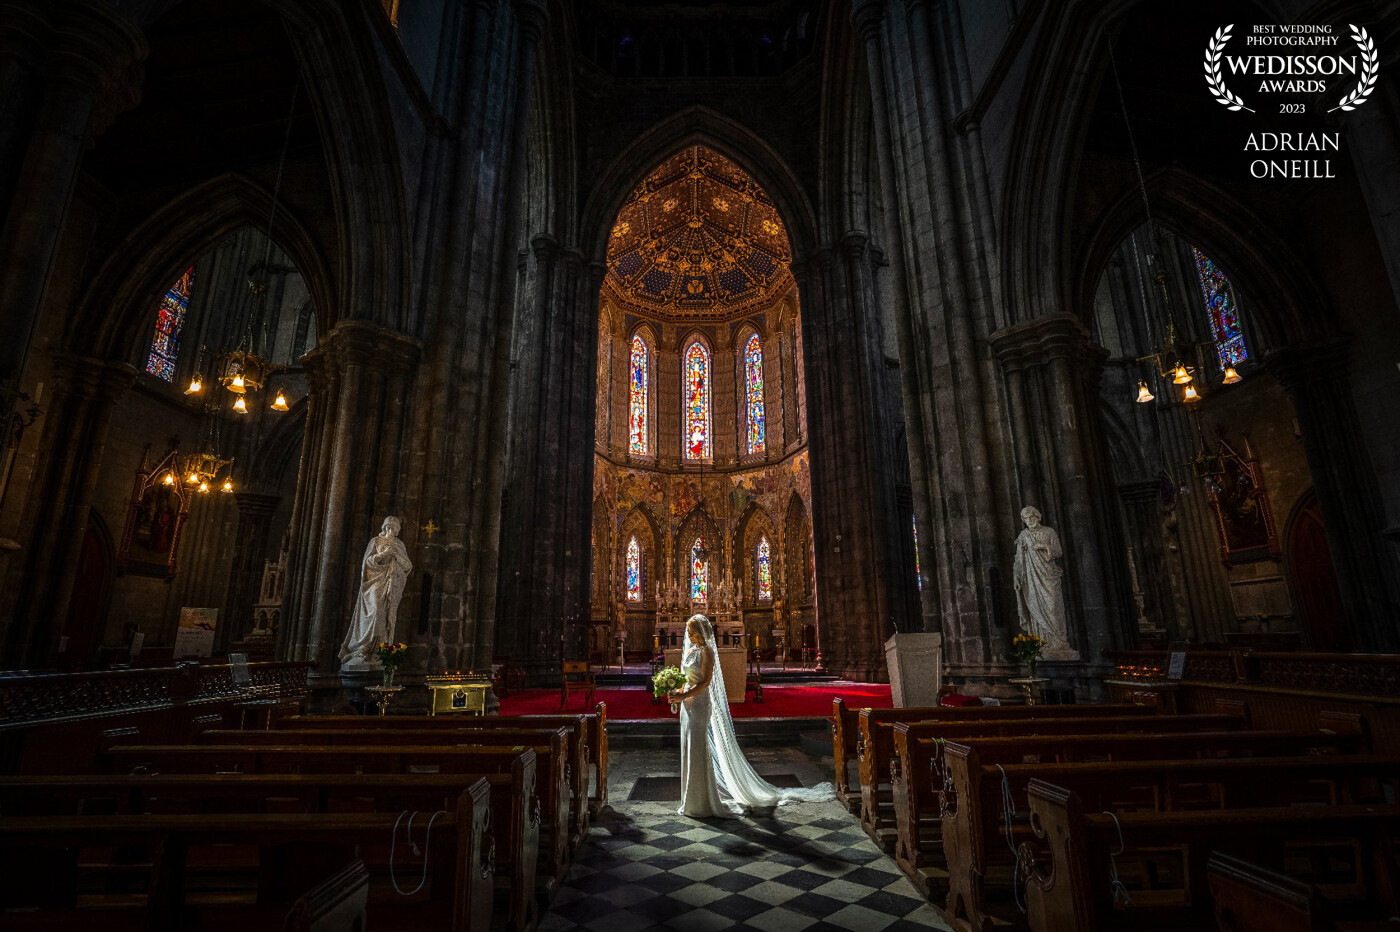 When you get married the most amazing Cathedral !!! this place was epic!! I wanted to encapsulate the whole place in the one image....there was a beautiful shaft of light backlighting the bride...Love when the natural light works beautifully